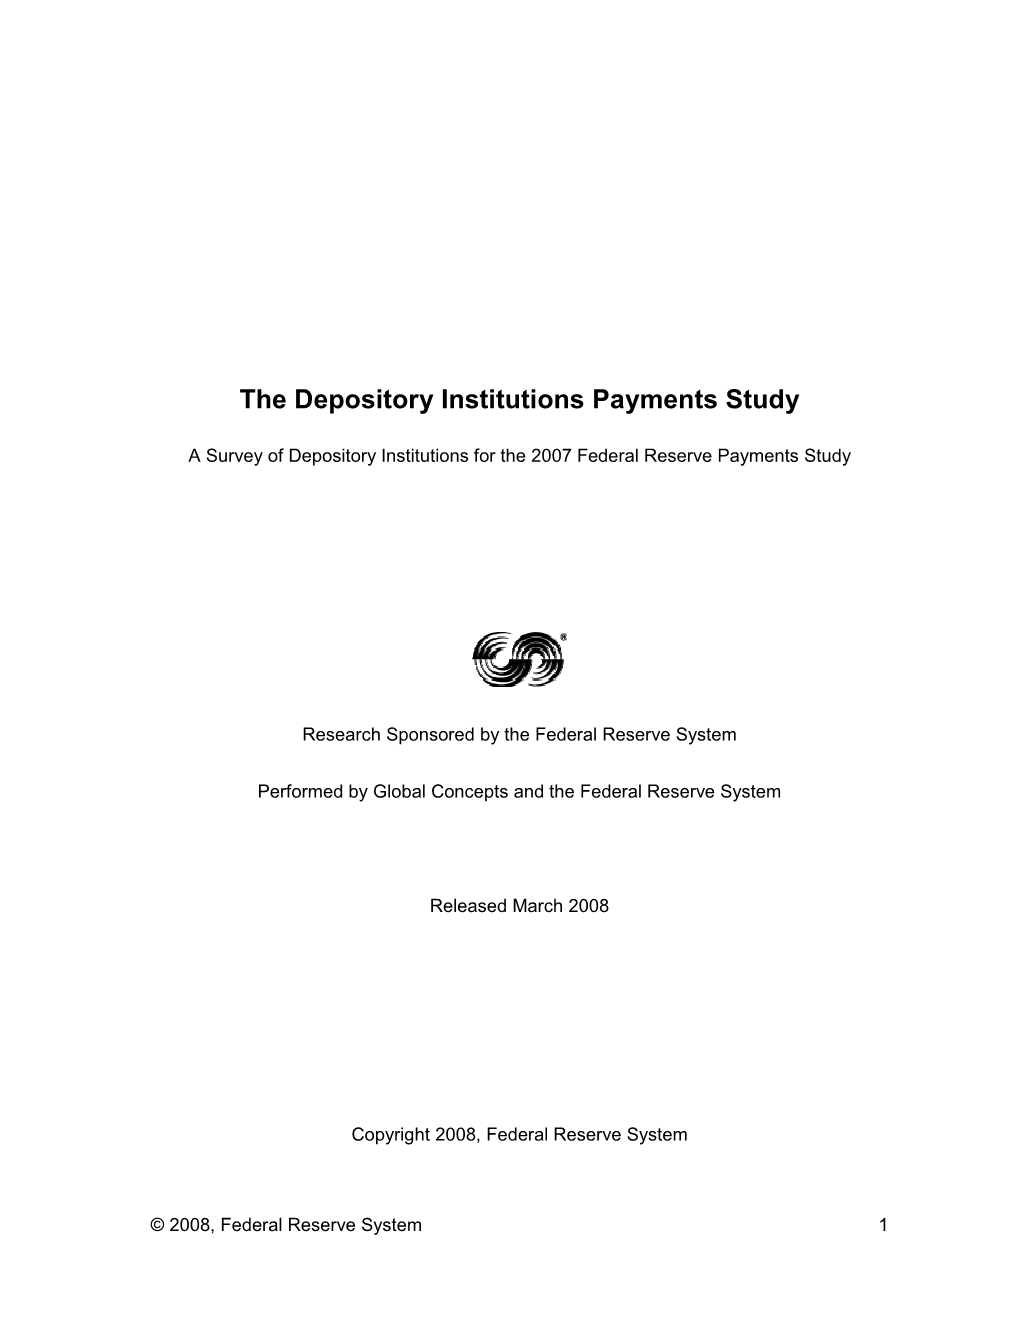 The Depository Institutions Payments Study